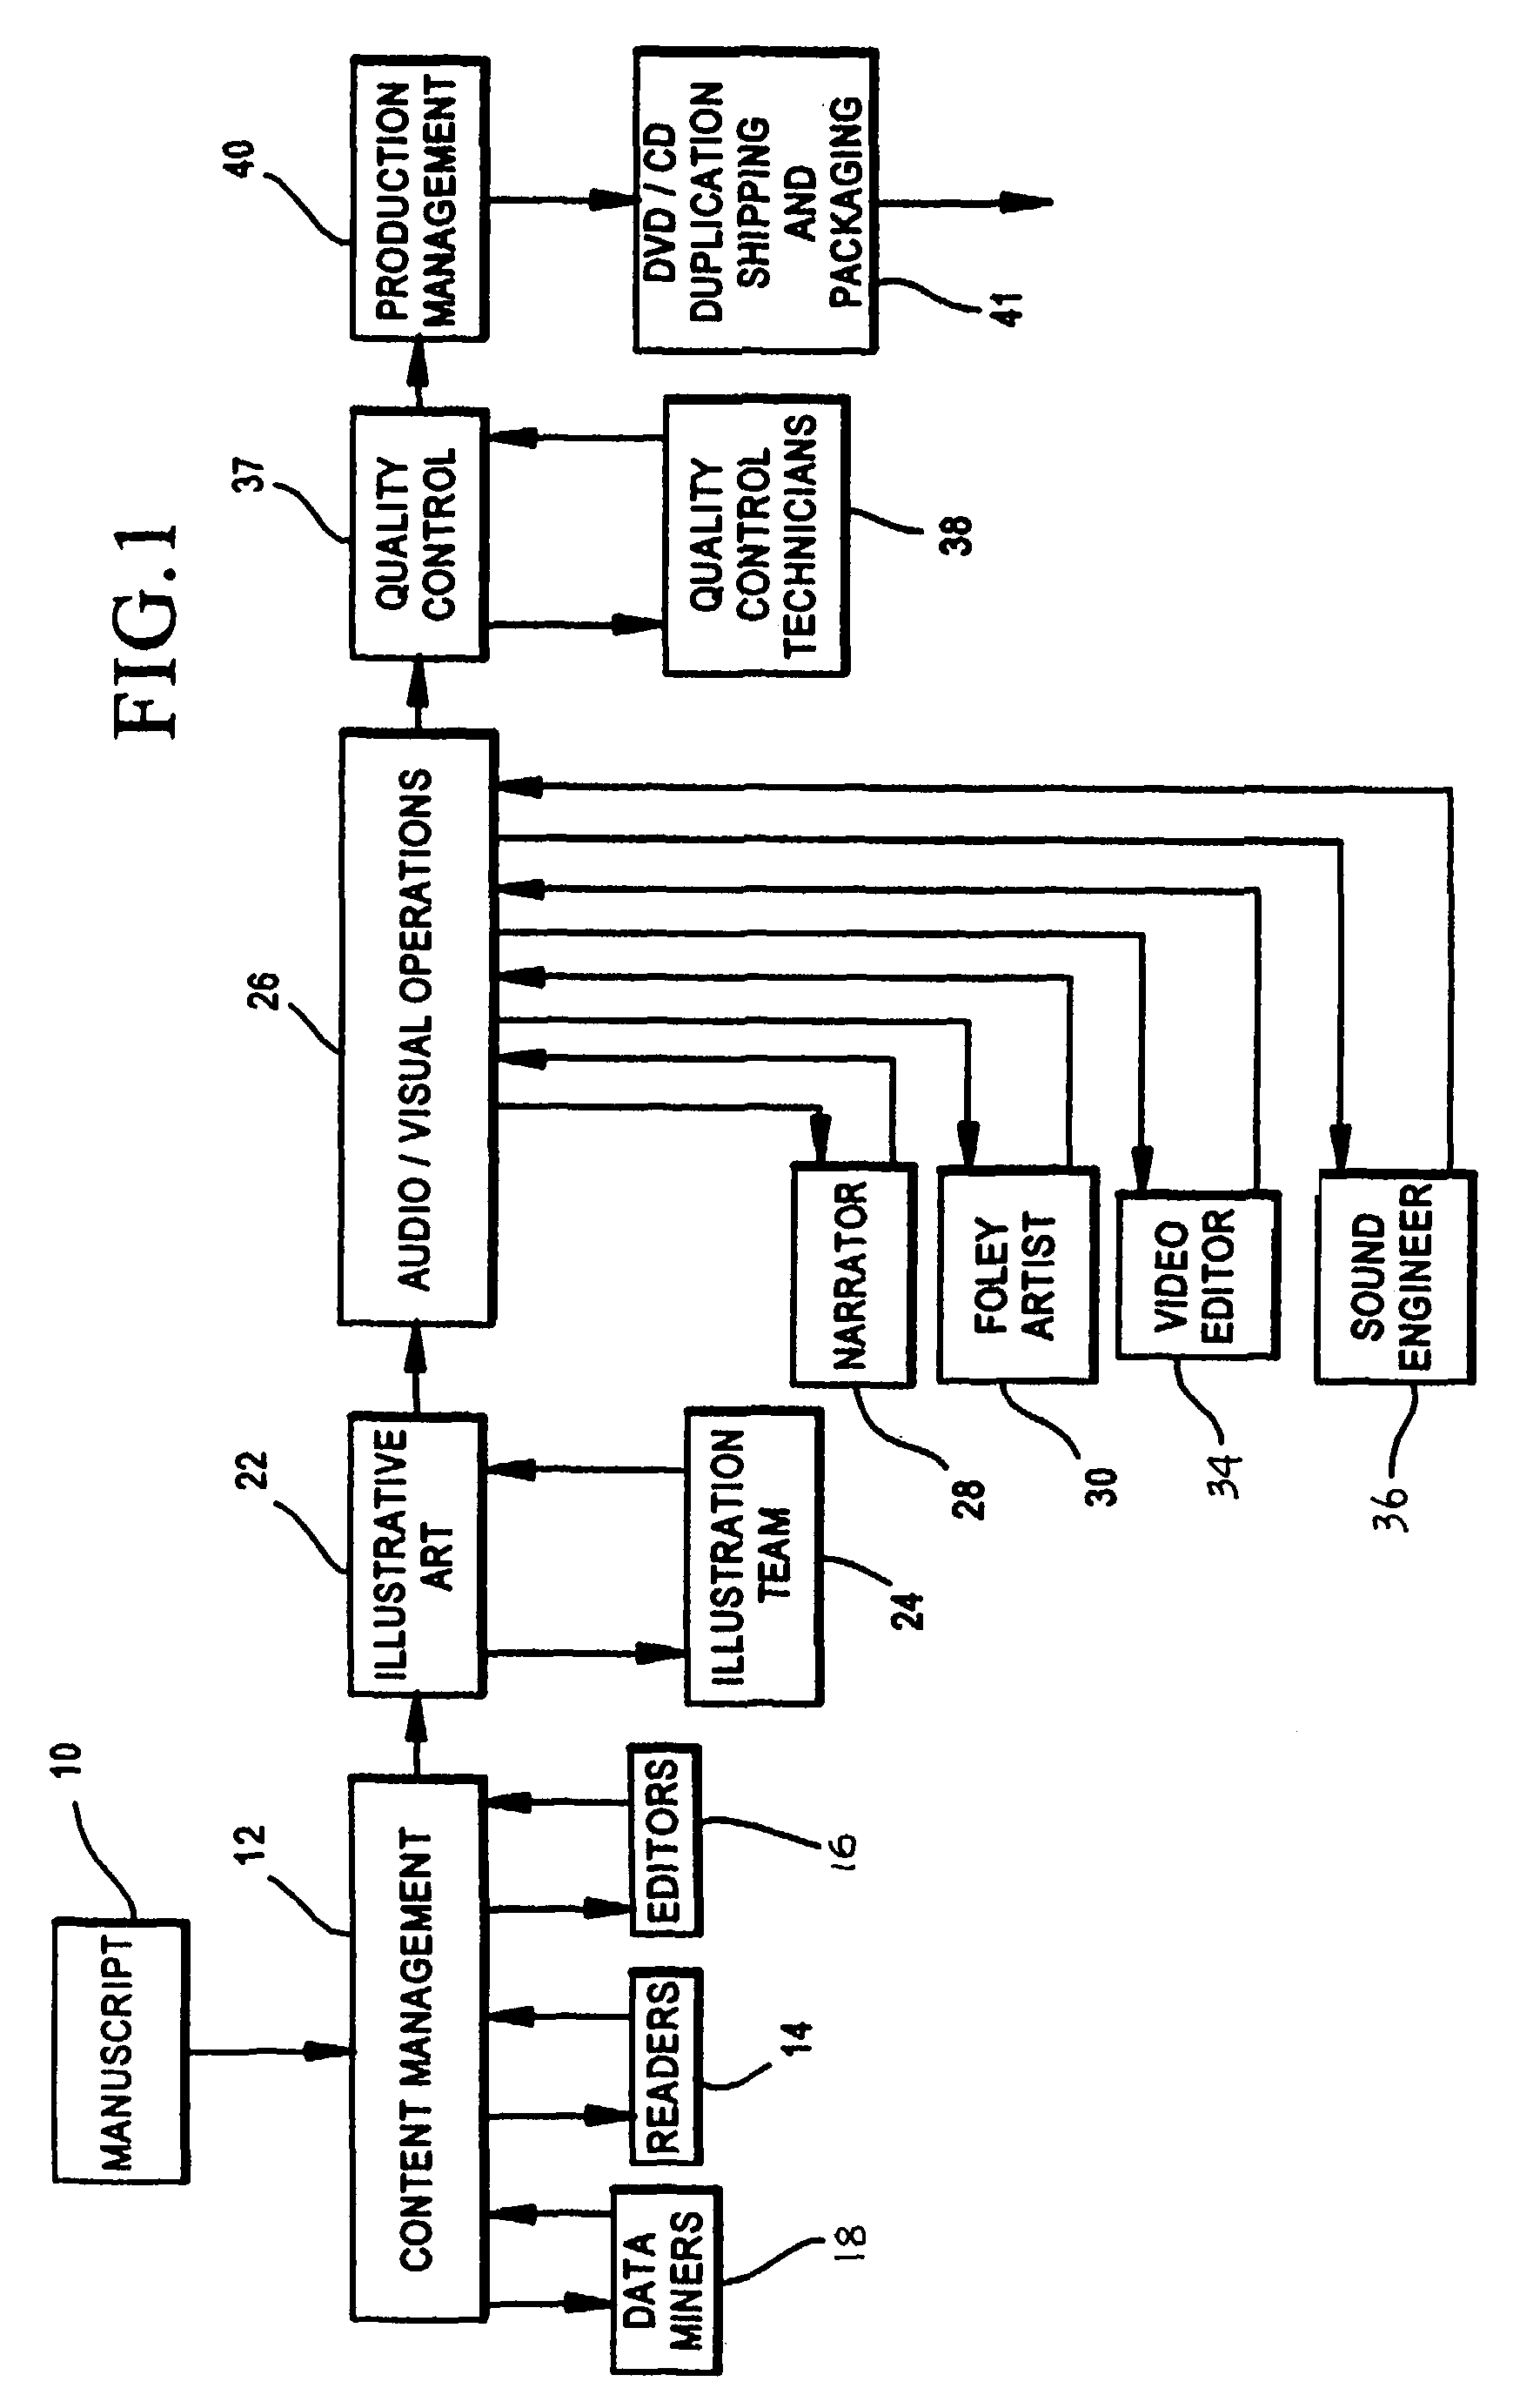 Multi-feature media article and method for manufacture of same